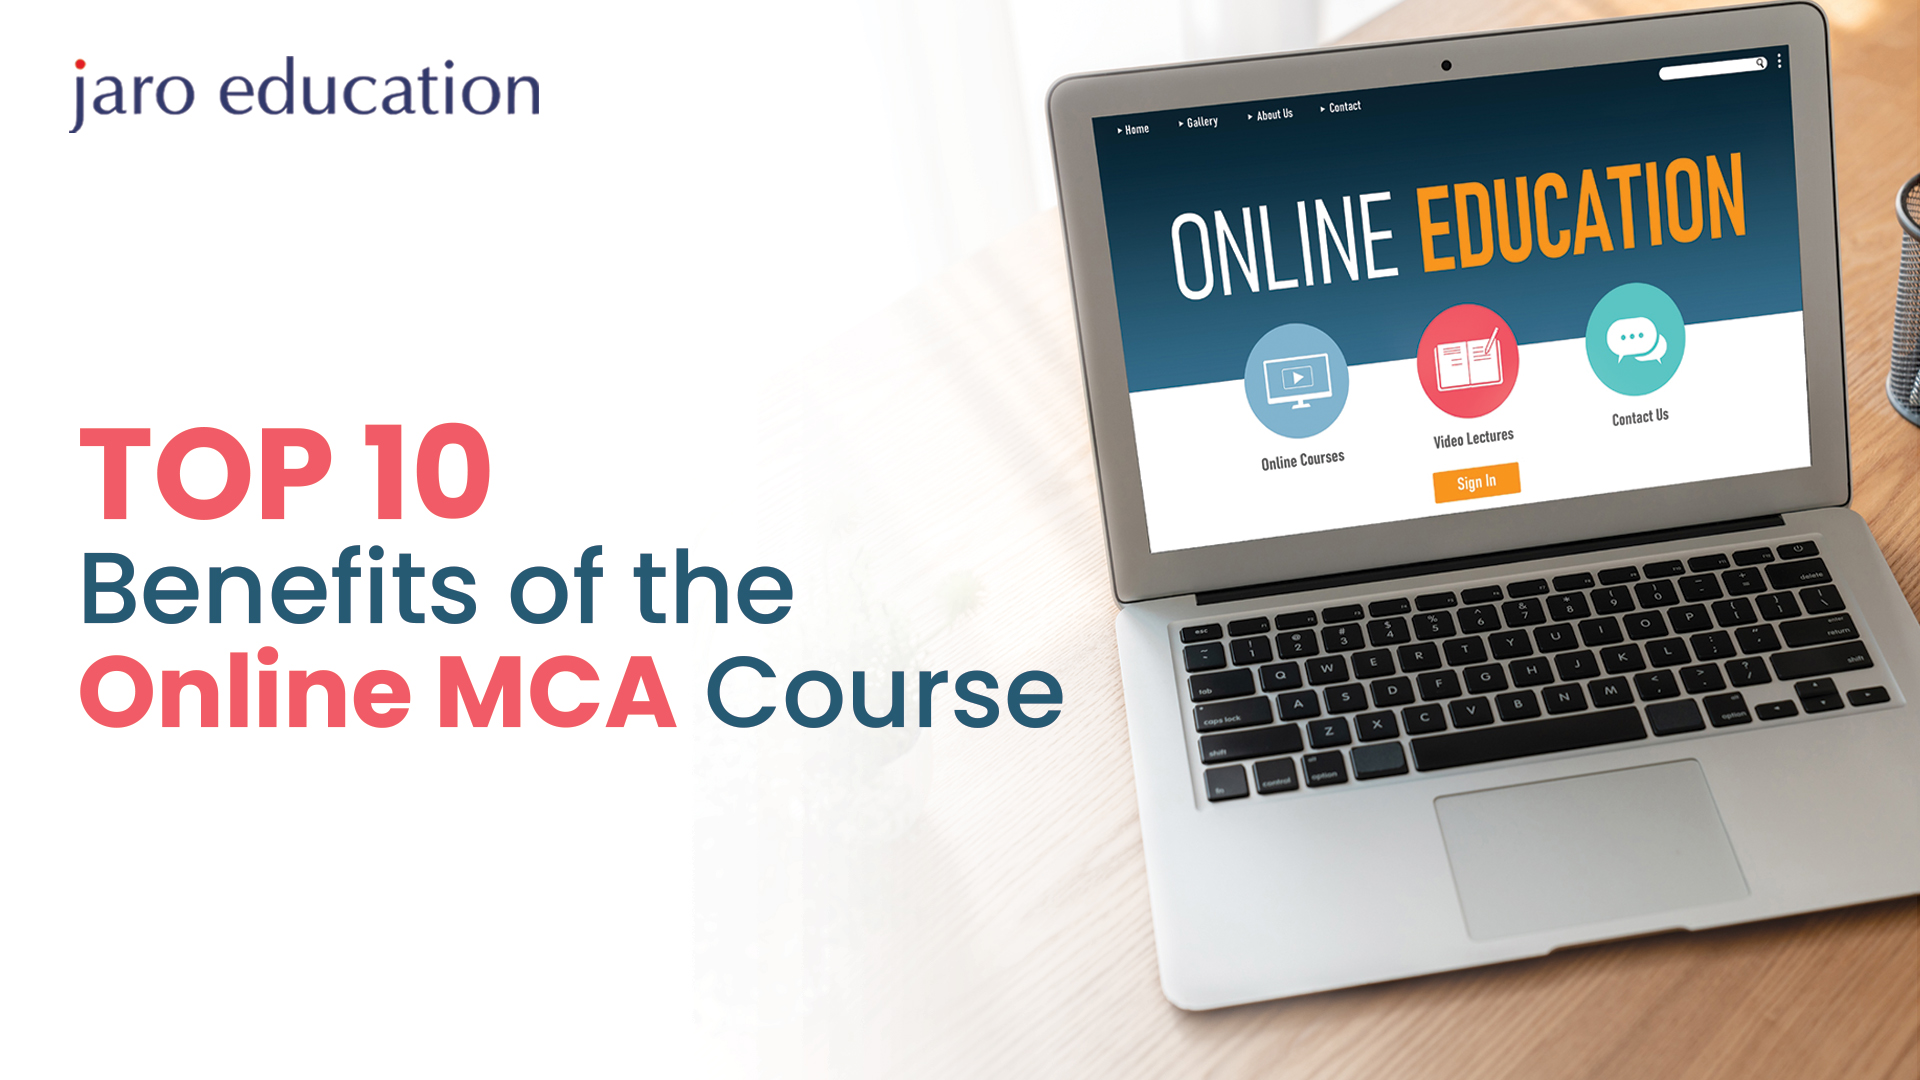 Top 10 Benefits of the Online MCA Course